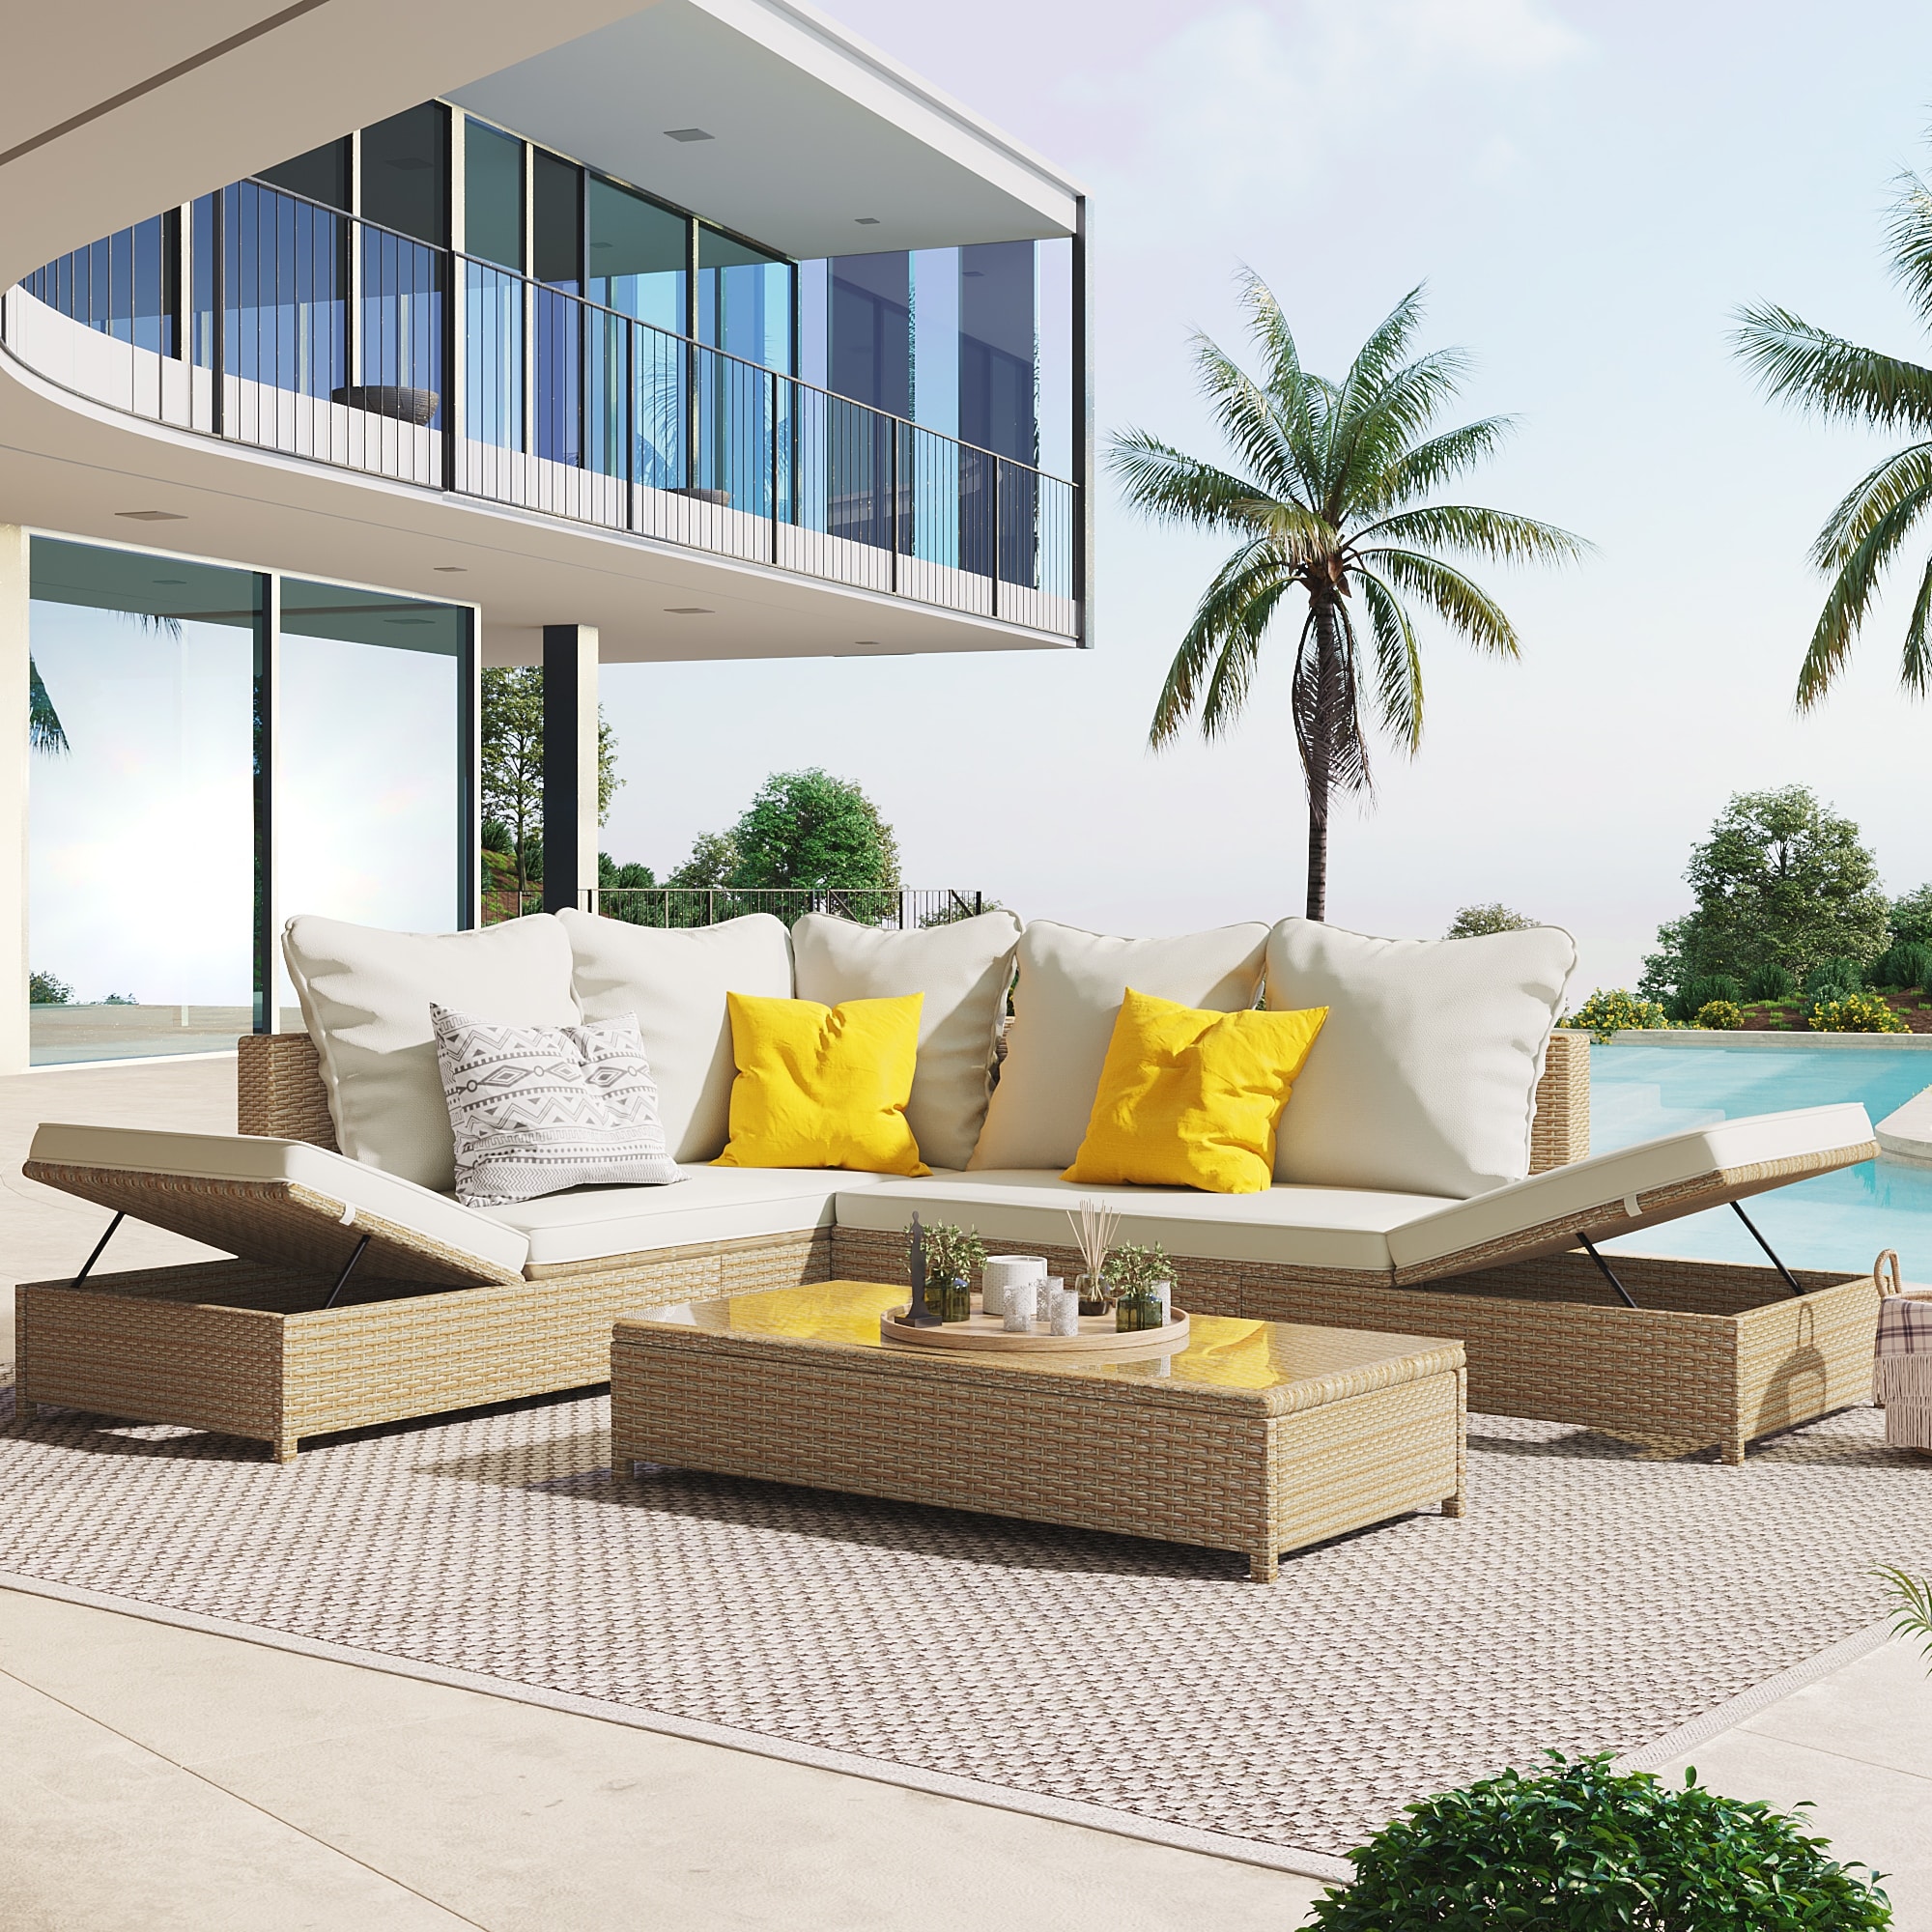 3-piece All-weather Rattan Sofa Set With Adjustable Chaise Lounge